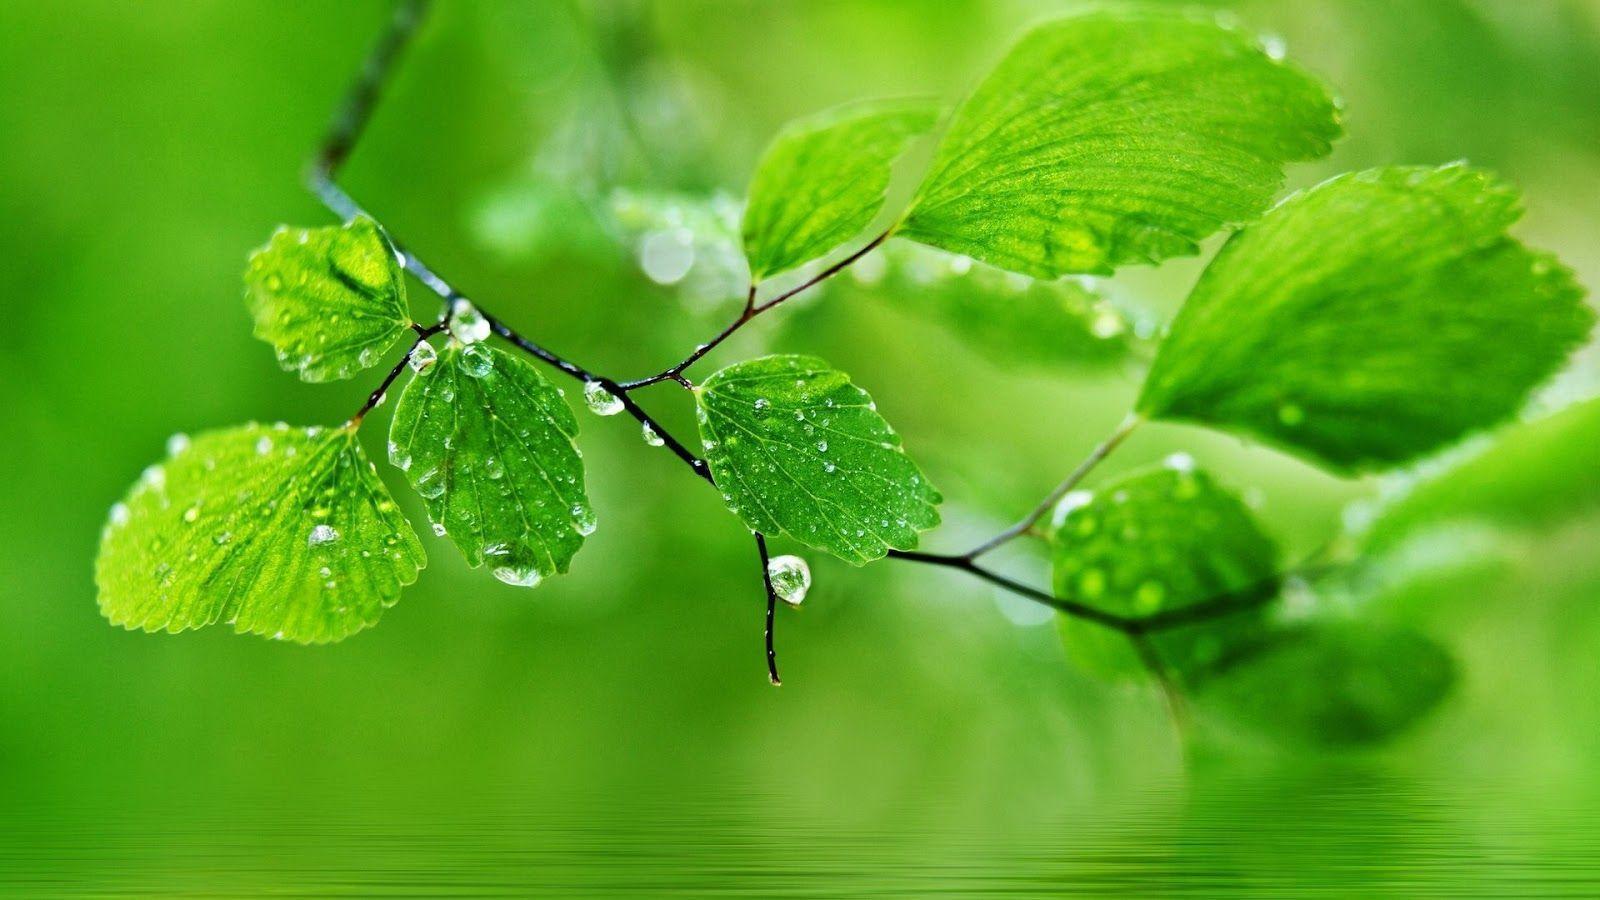 Water Drops On Leaves HD Desktop Wallpaper For Android. Free